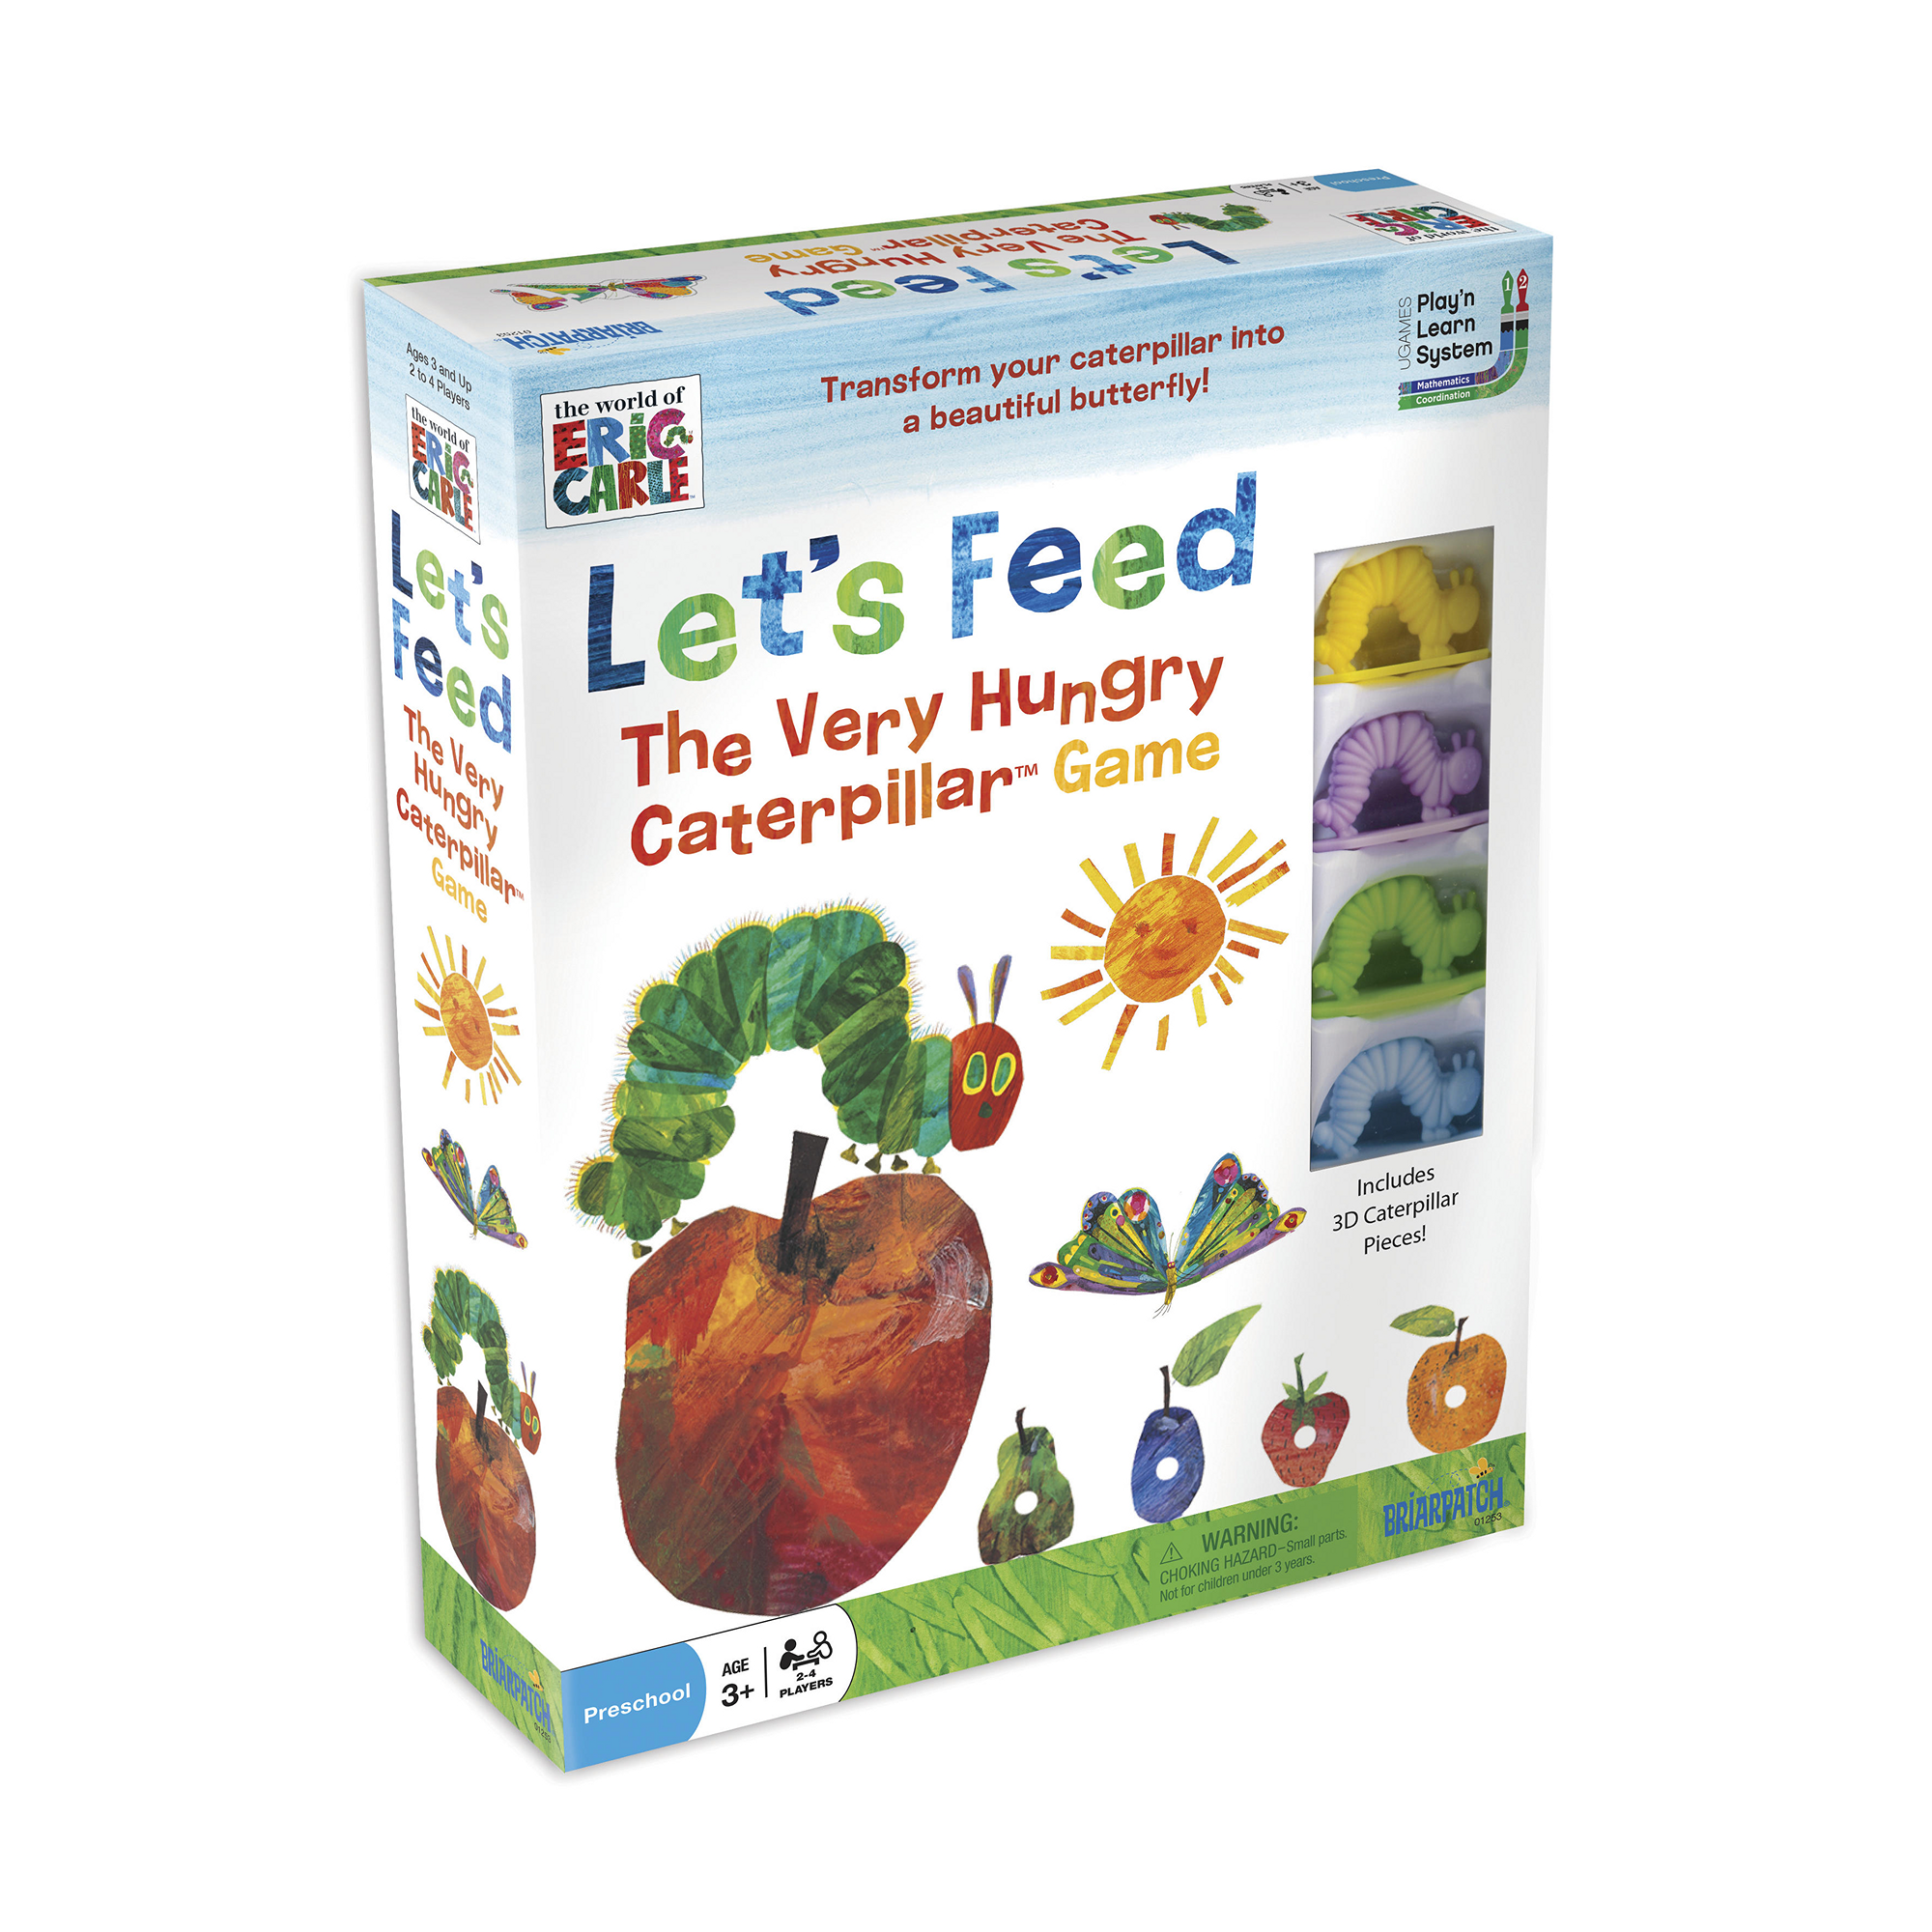 Lets Feed The Very Hungry Caterpillar